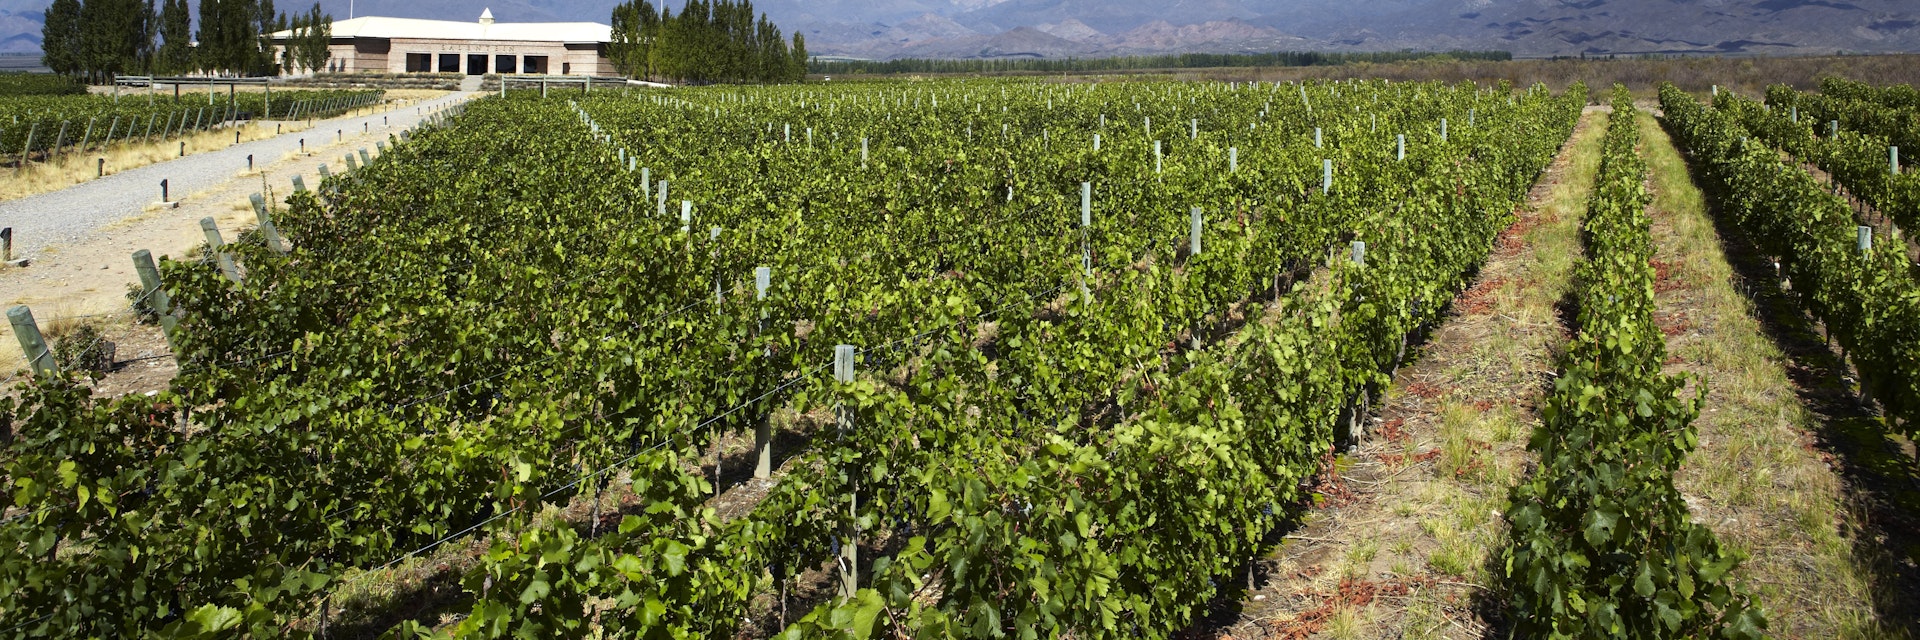 Vineyards in valley with Andean peaks in background.